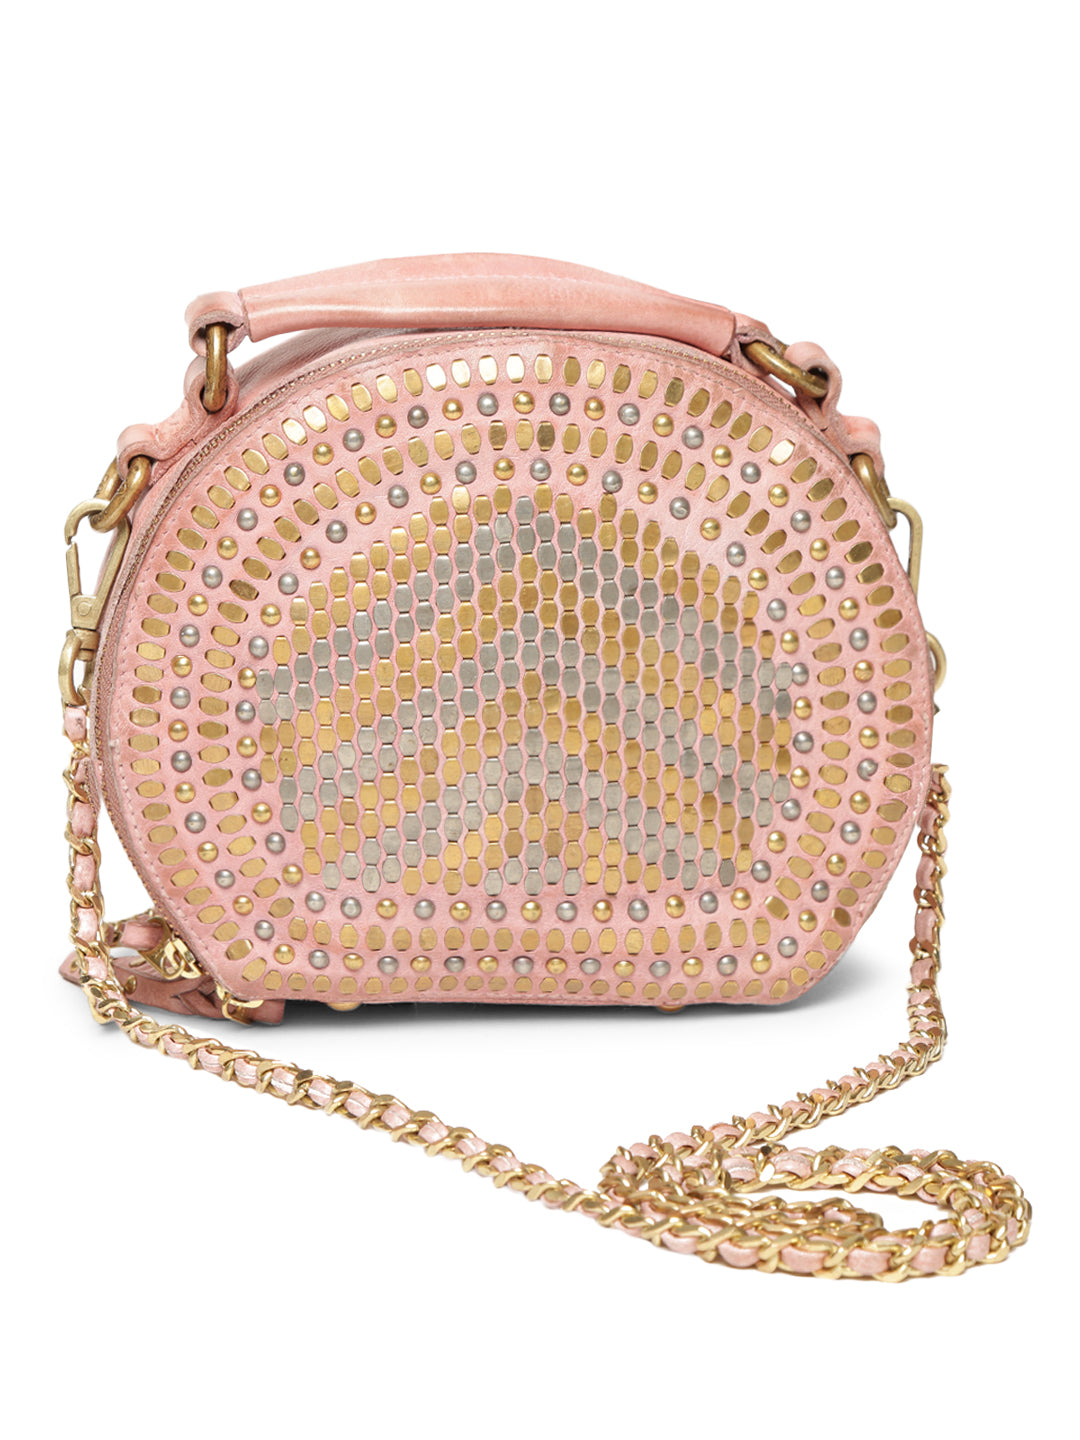 Chic Riveted Elegance: Blush Leather Round Shape Crossbody with Chain Handle By Art N Vintage